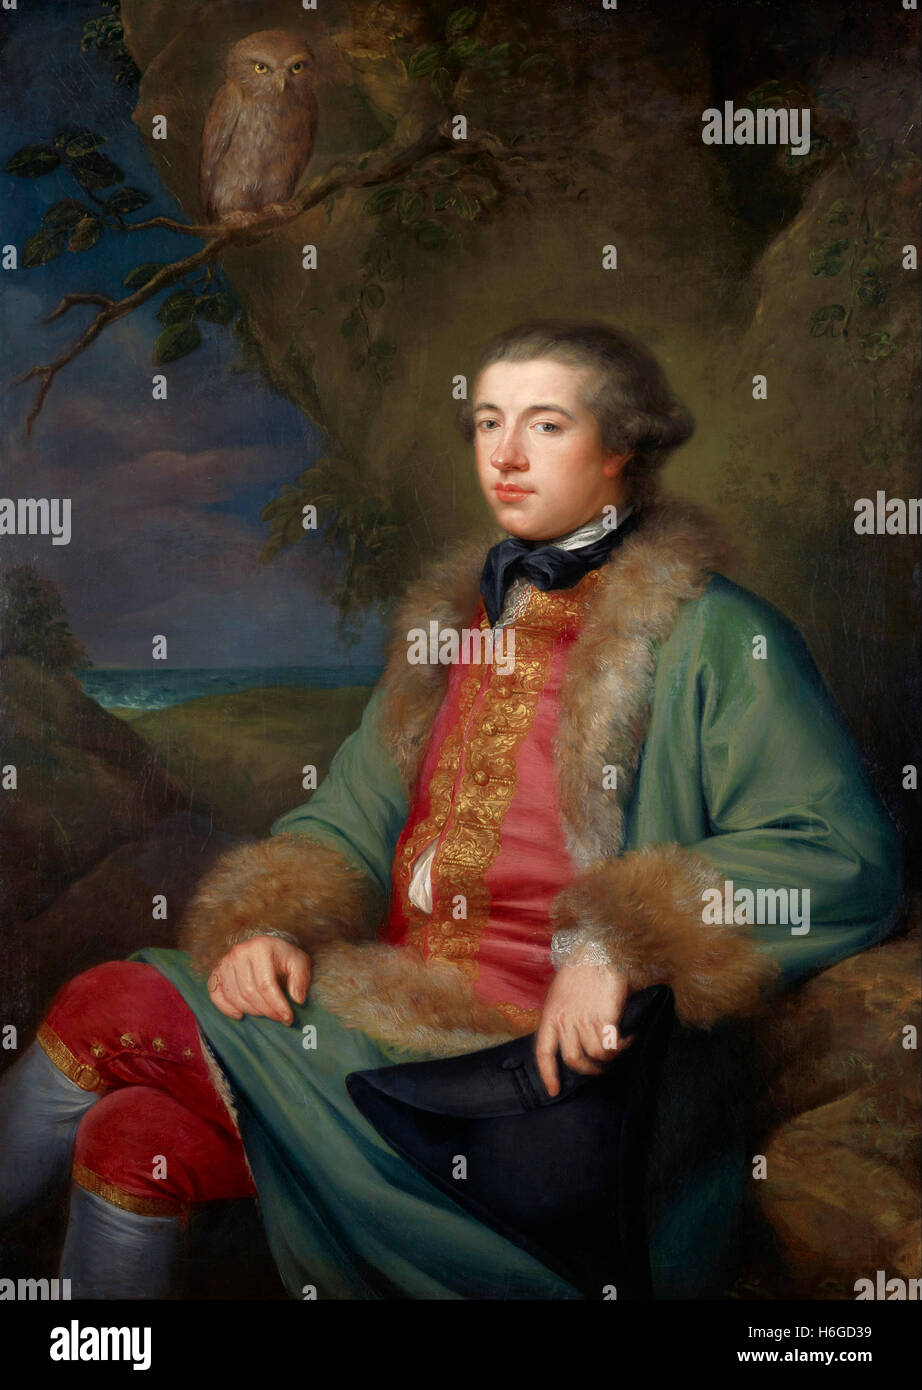 James Boswell. Portrait of James Boswell  (1740–1795), the 18th century Scottish biographer and diarist, by George Willison, oil on canvas, 1765. Stock Photo